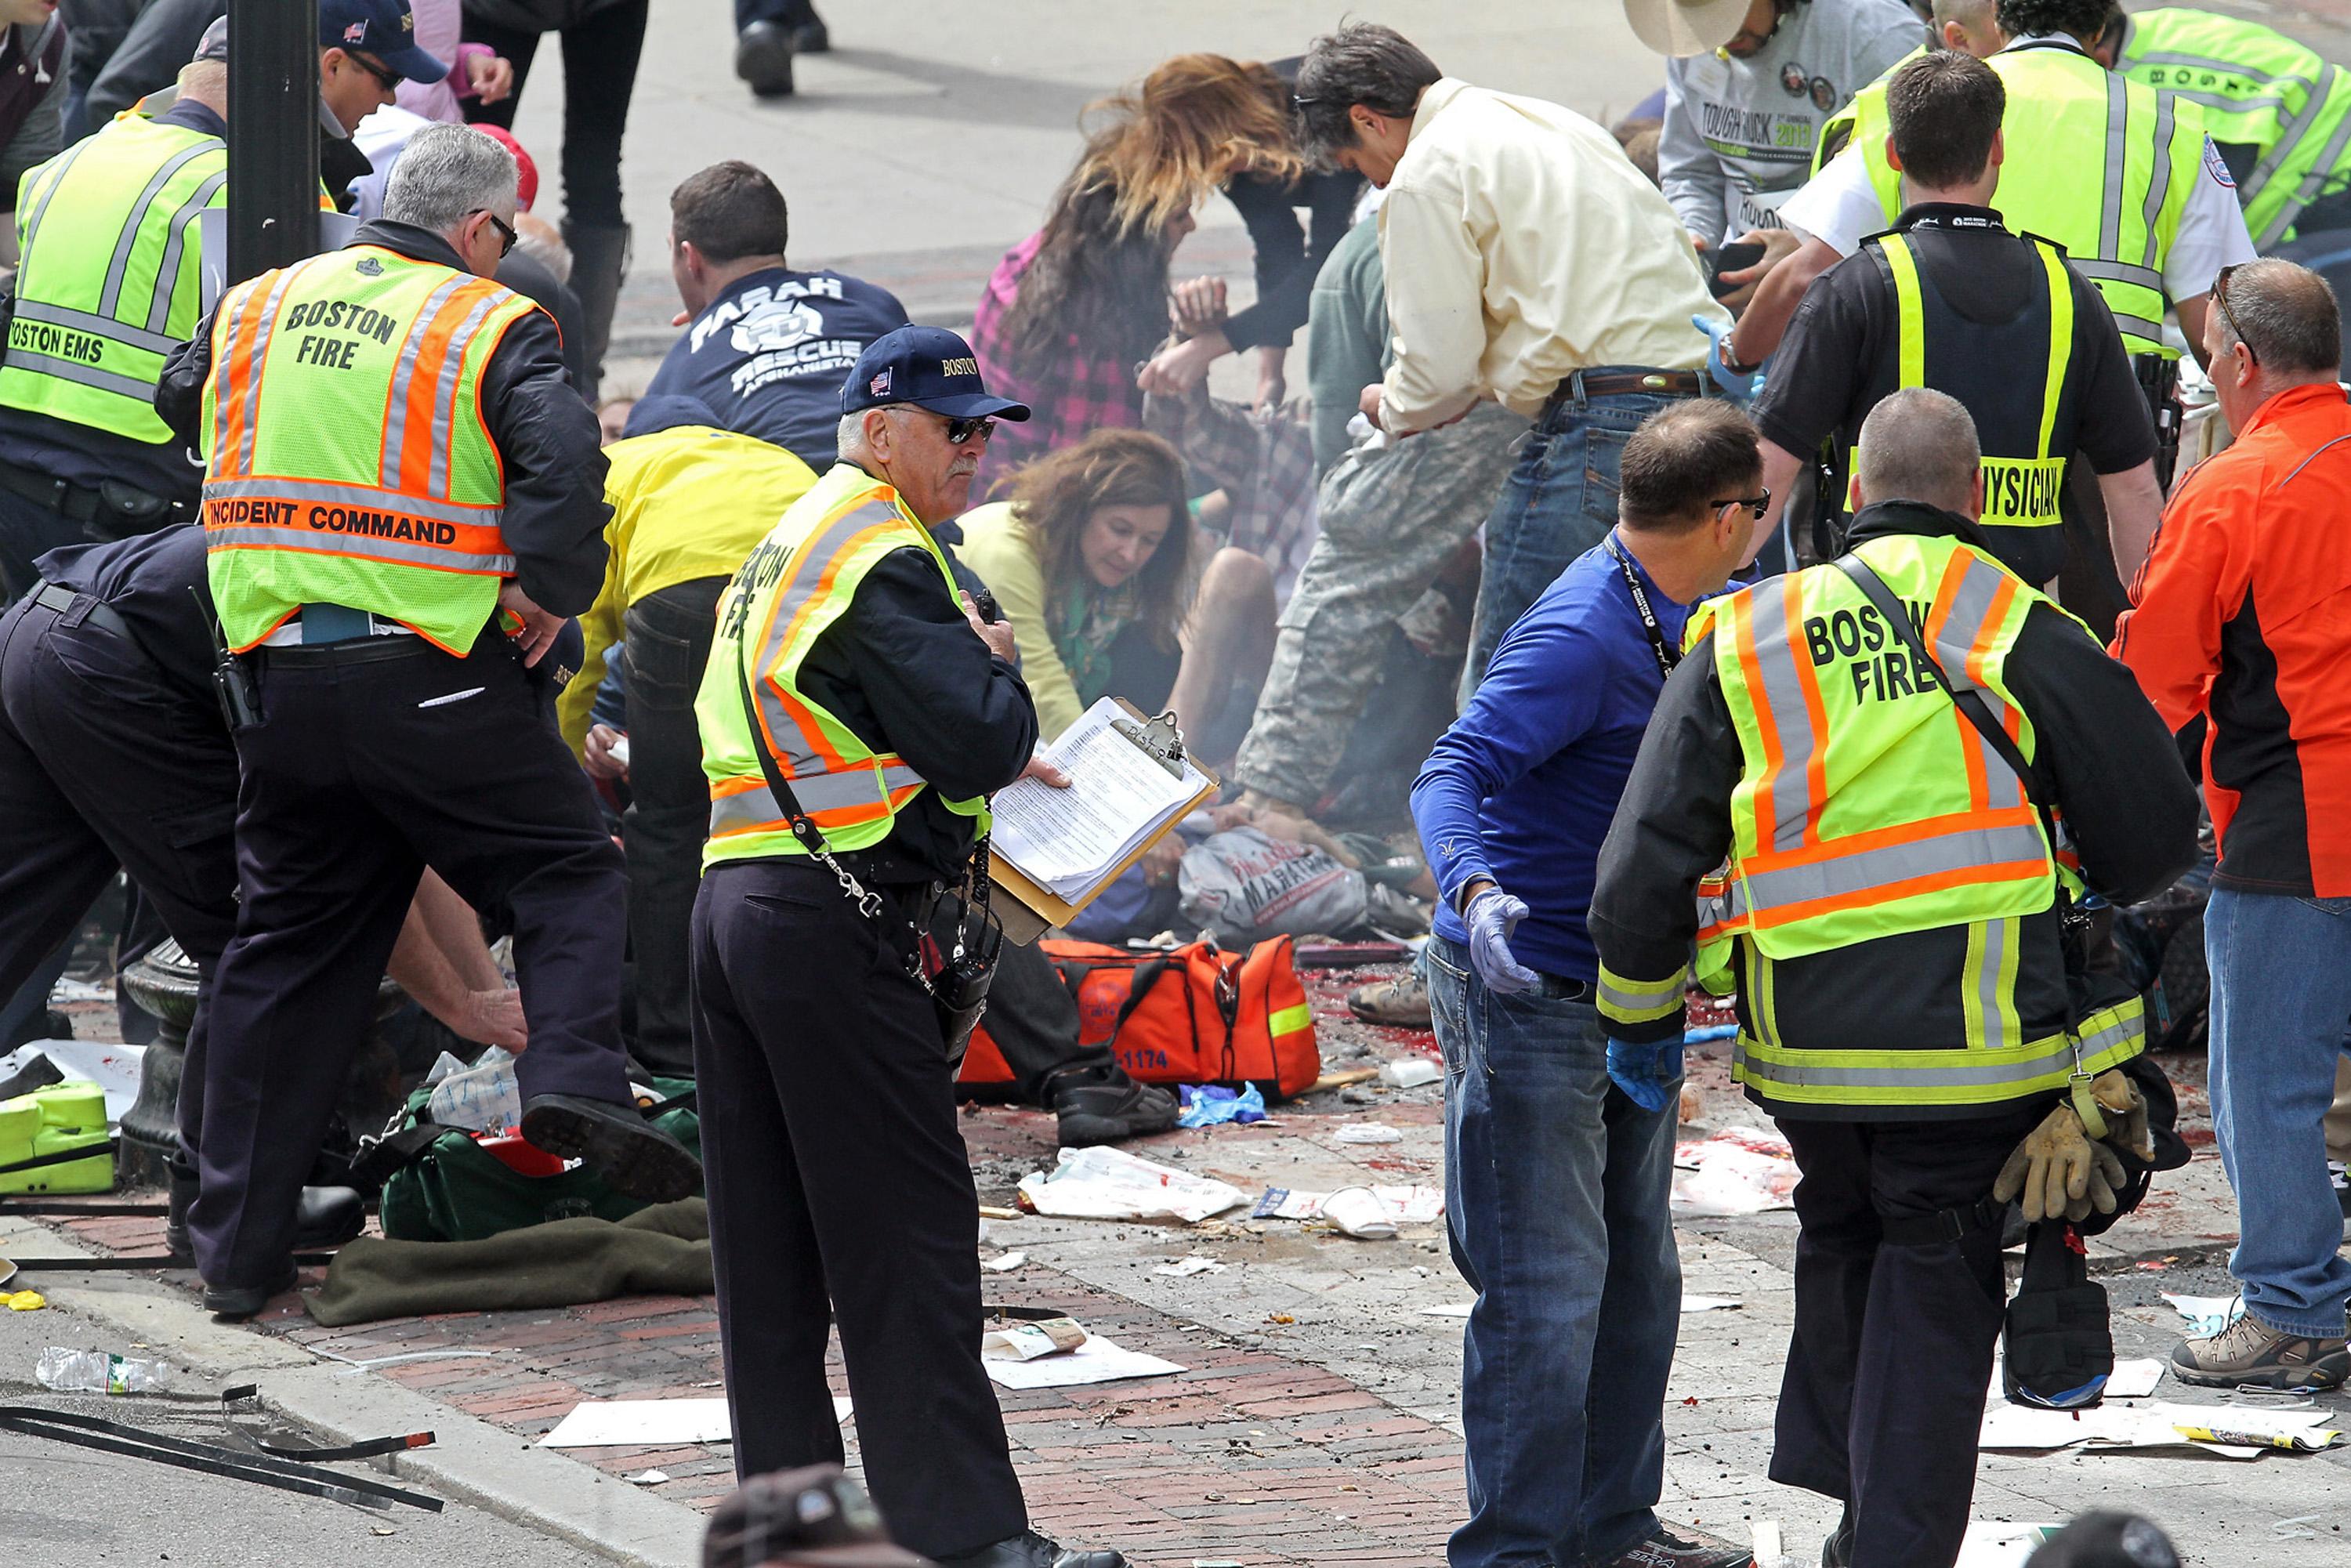 Hungary Condemns The Boston Explosions